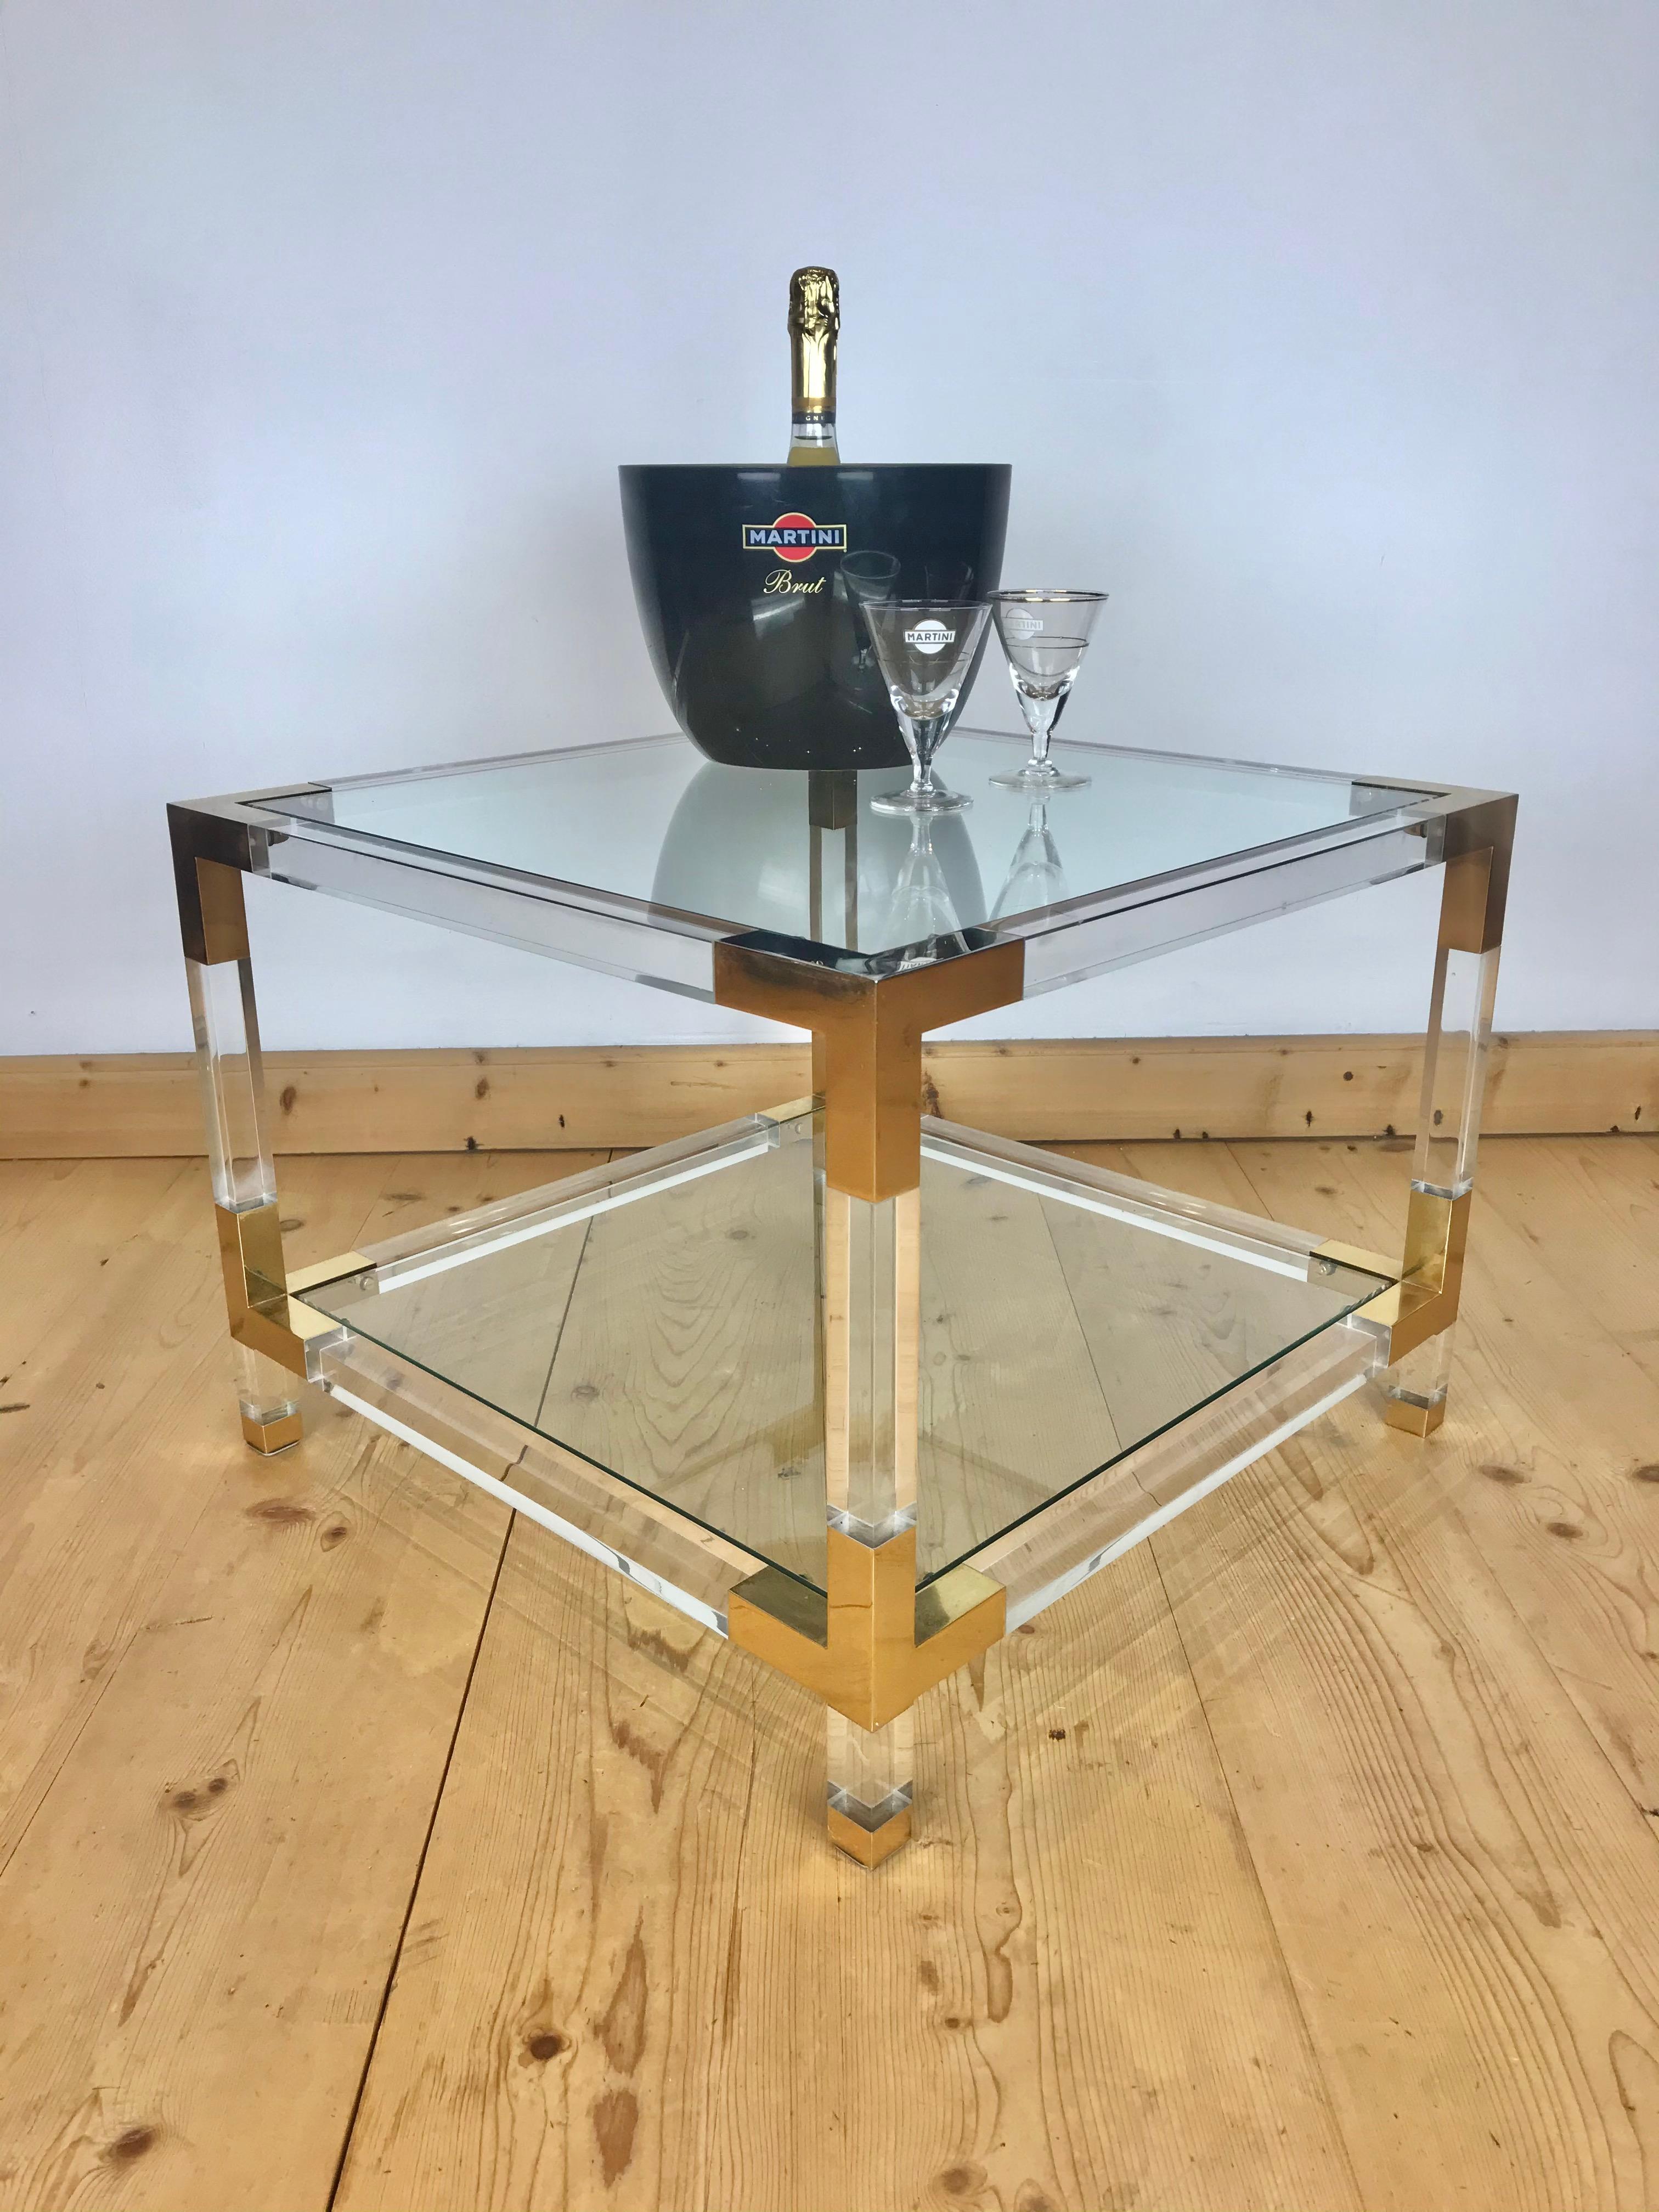 Square coffee table made of lucite, brass and glass . 
This Hollywood Regency coffee table has a lucite or acrylic base, 
polished brass details and 2 removable glass shelves.
As stylish and modern coffee table or cocktail table from the 1970s.